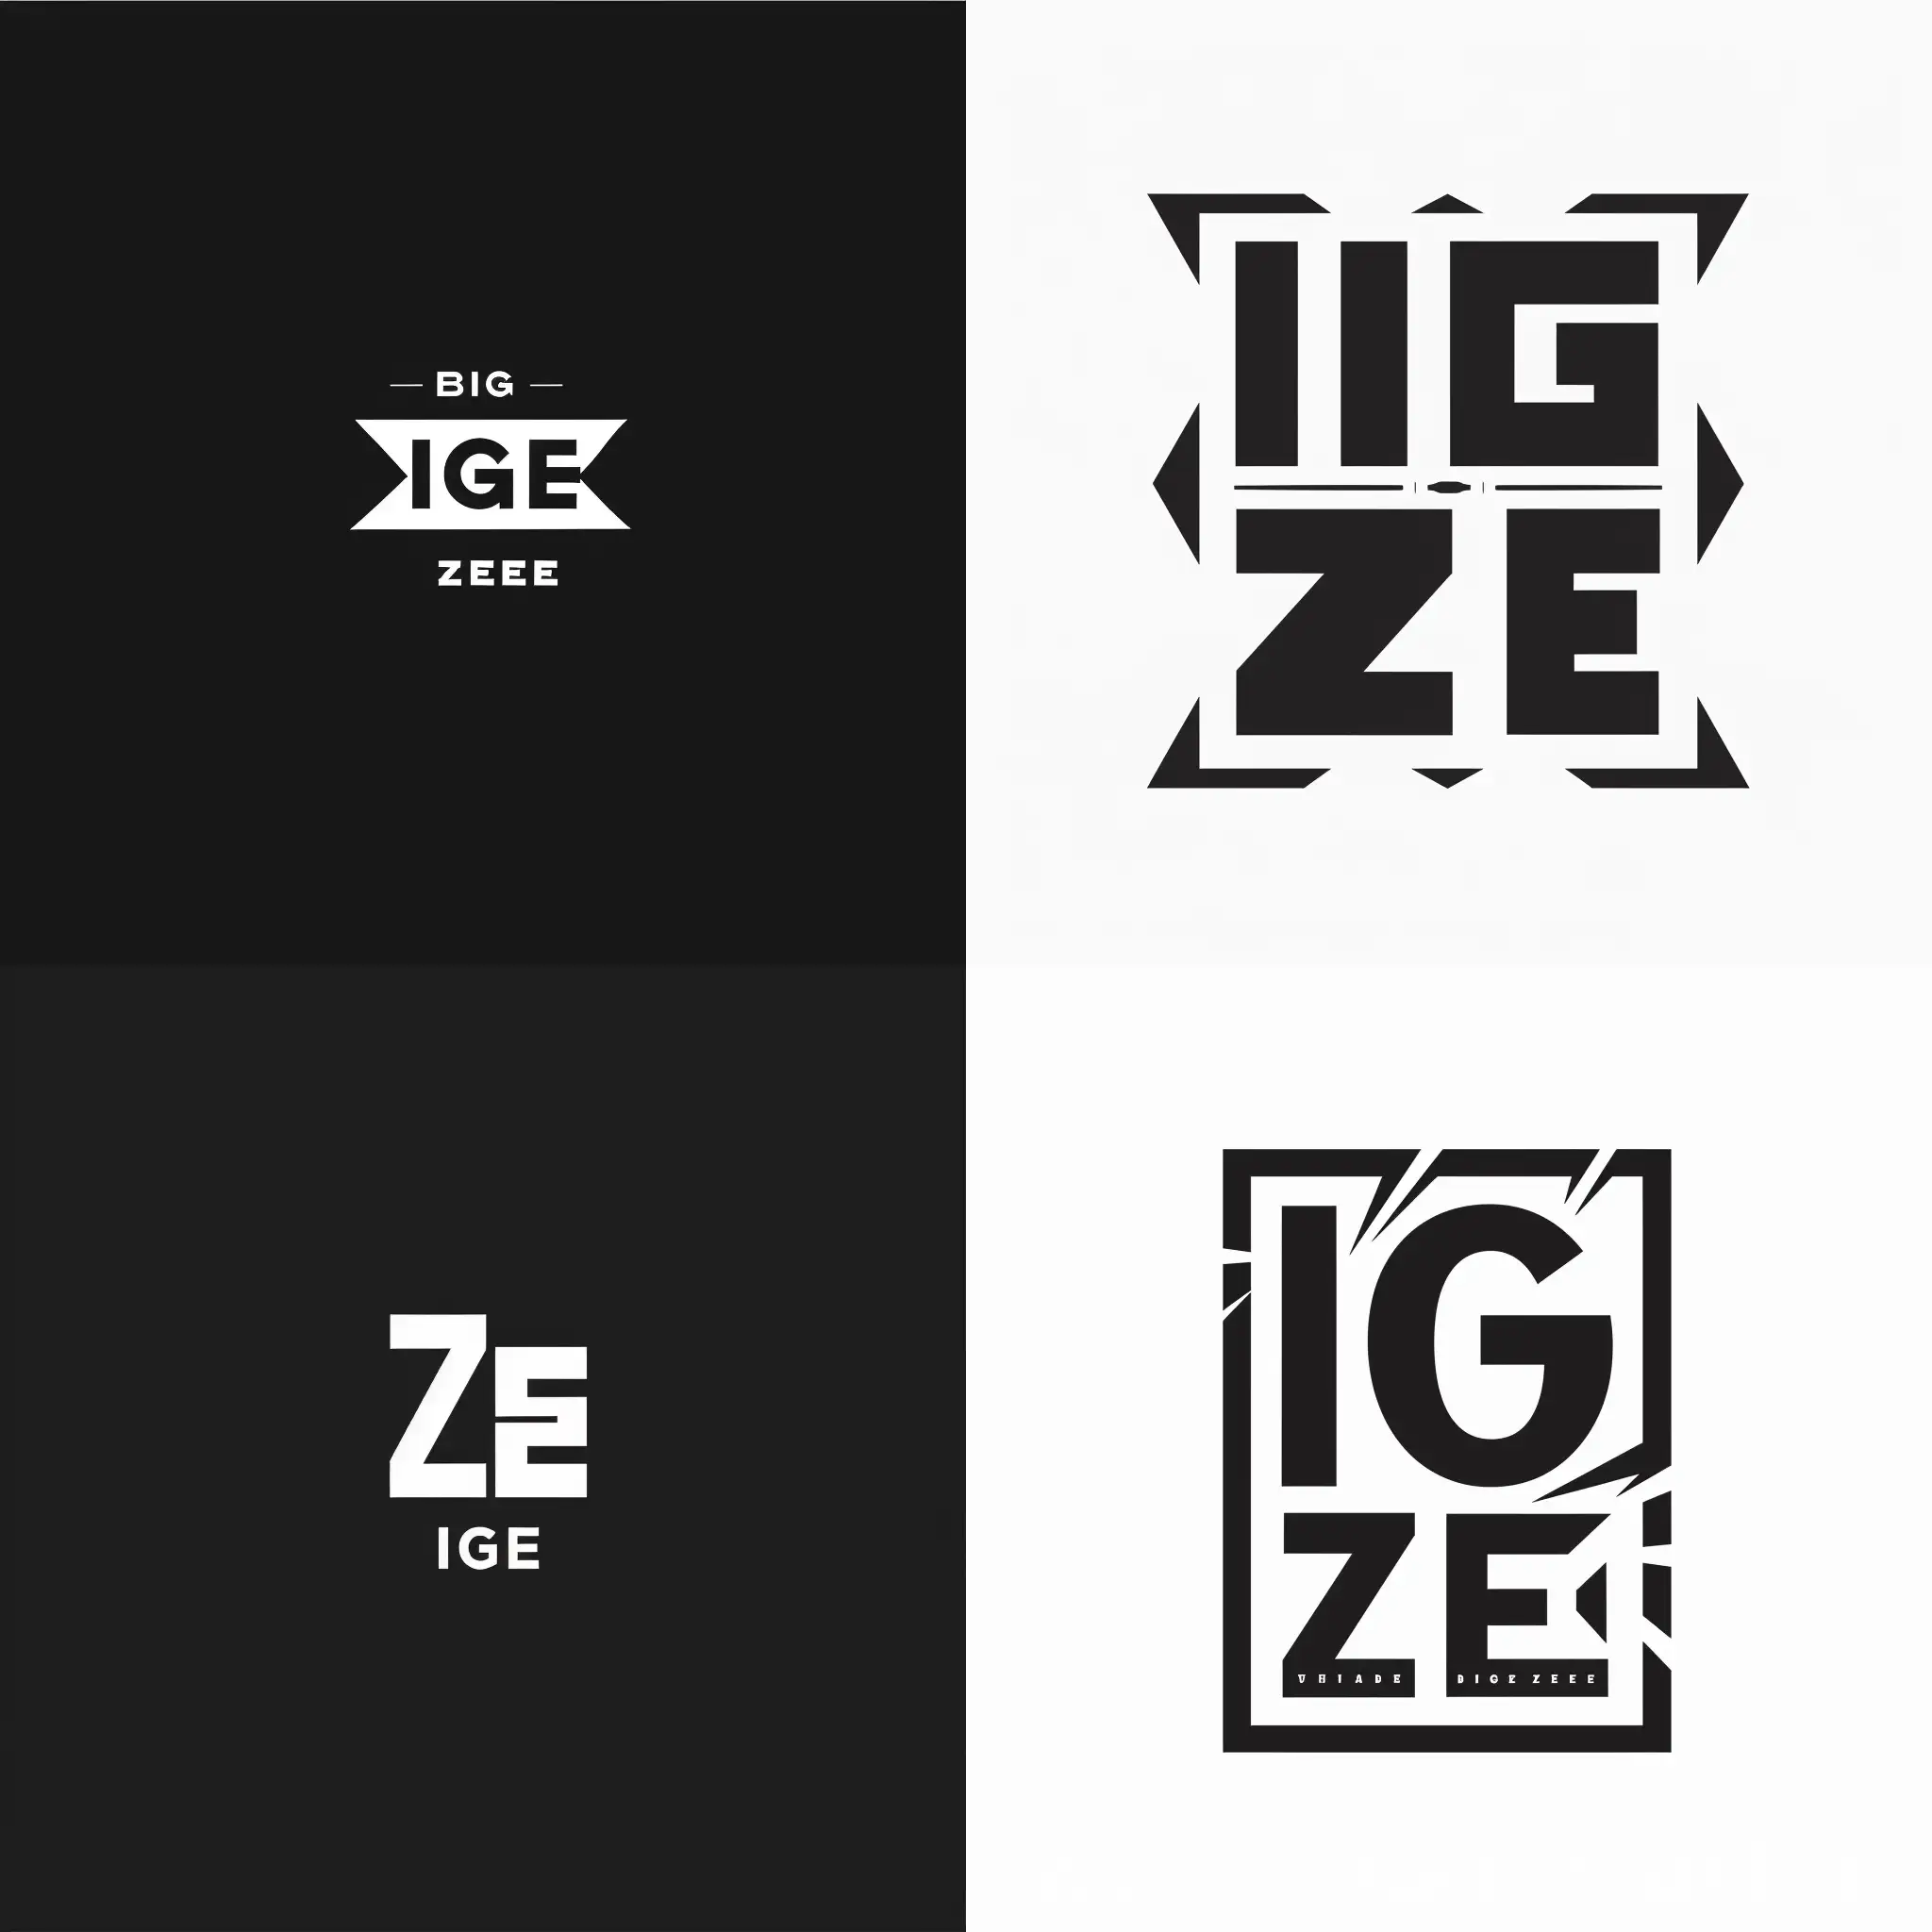 BIG-ZEE-Logo-in-Simple-Black-and-White-Professional-Design